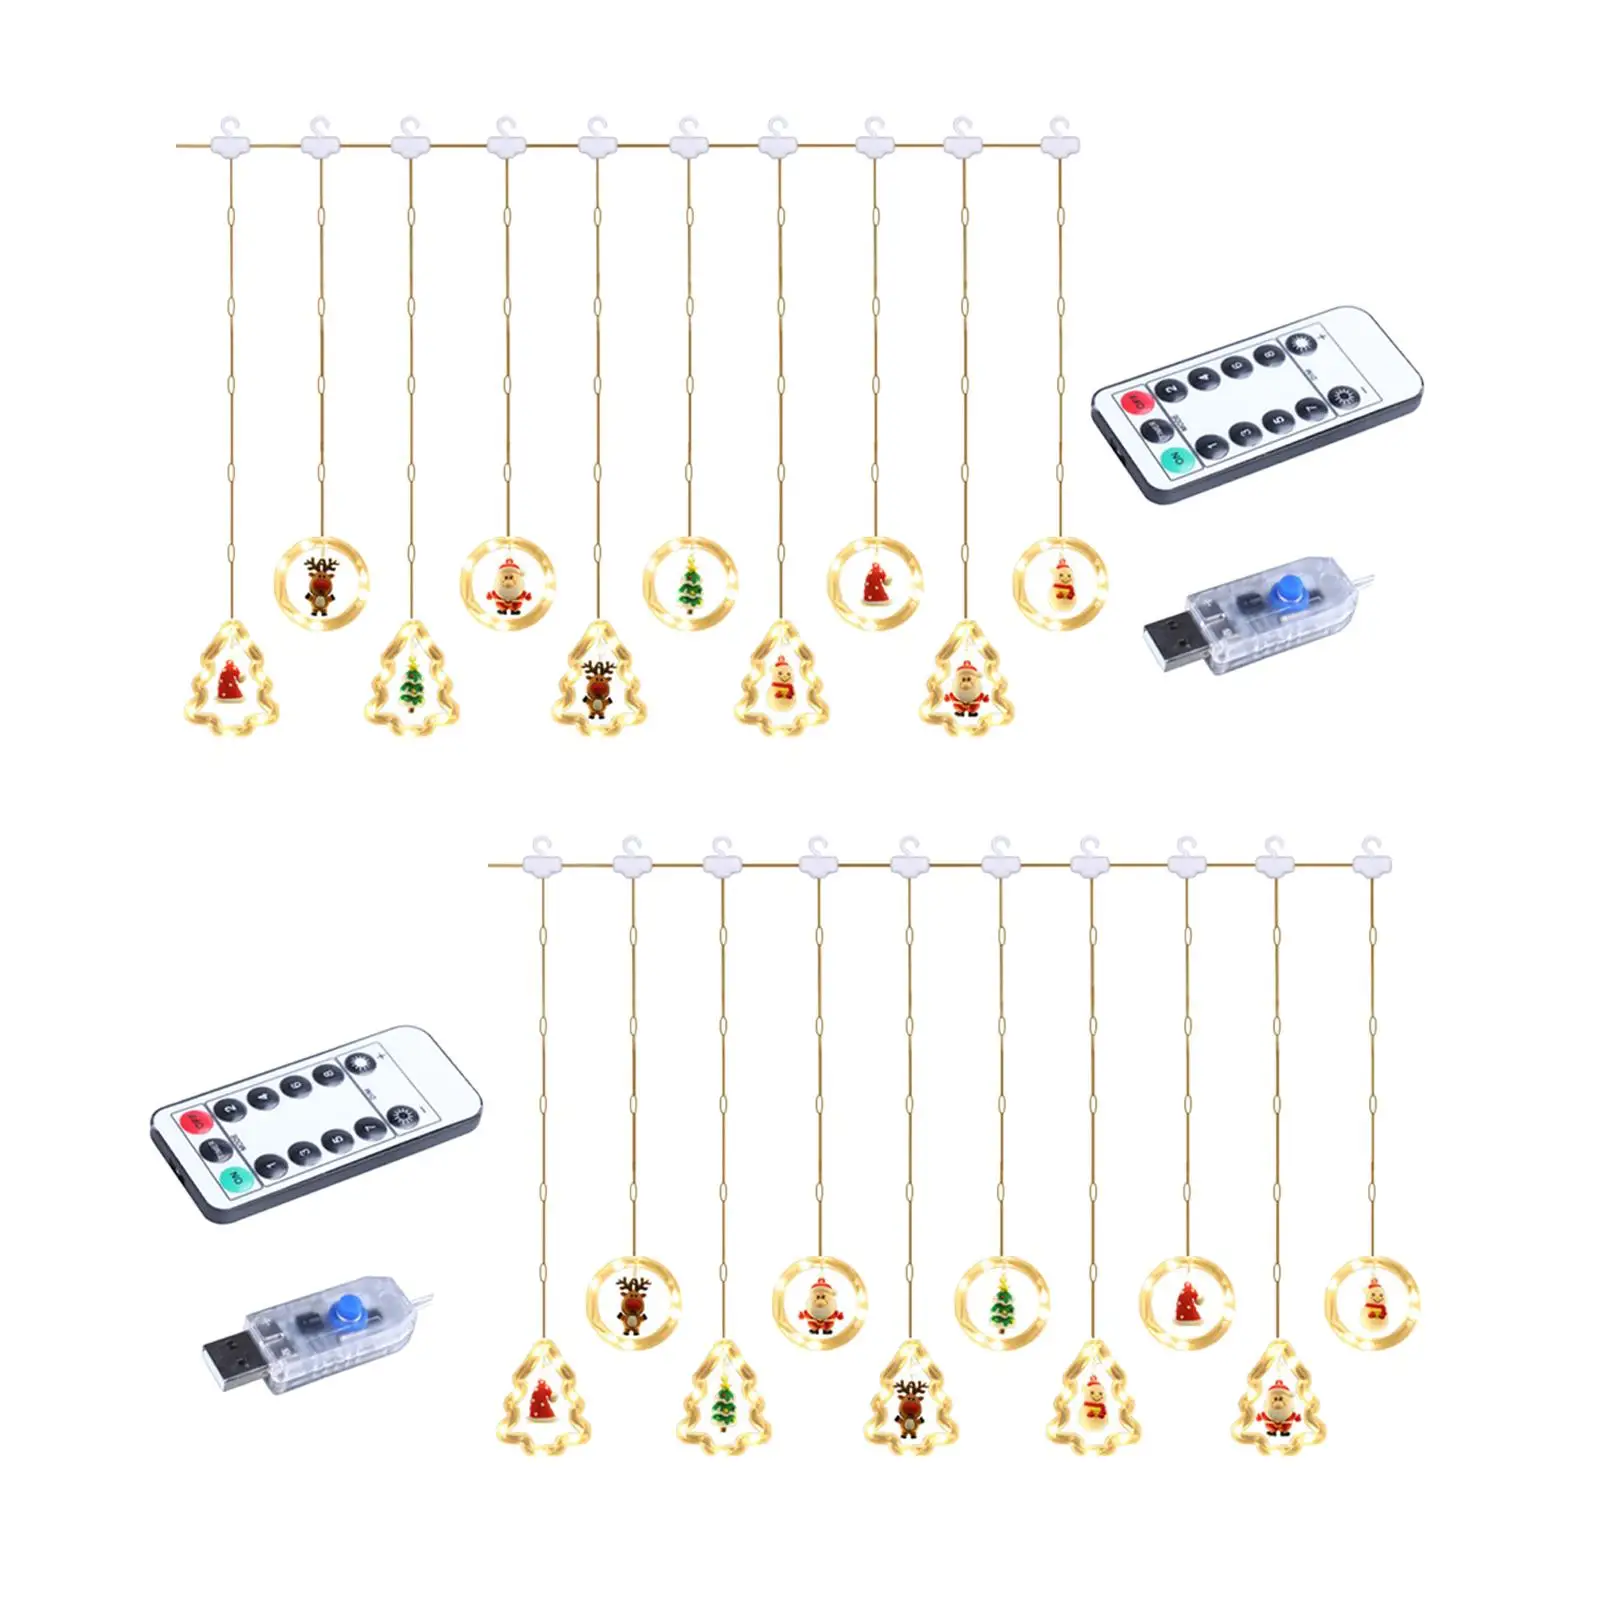 LED Christmas String Light Lighting Ornament Hanging Remote Control for Indoor Party Yard Decoration